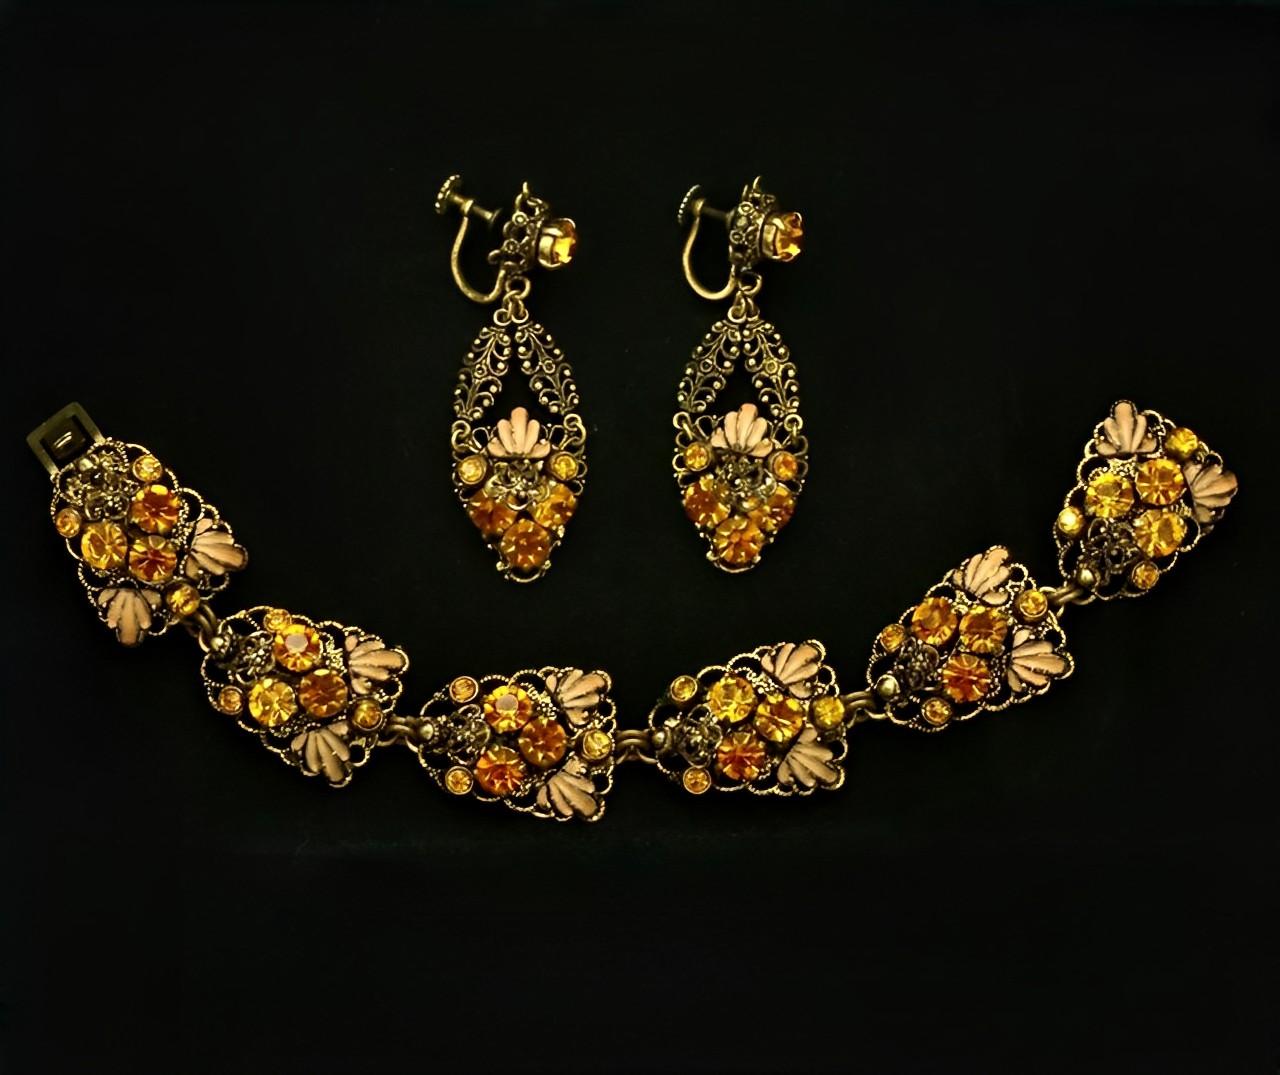 Gold Plated Filigree and Citrine Rhinestone Link Bracelet and Earrings Set For Sale 5